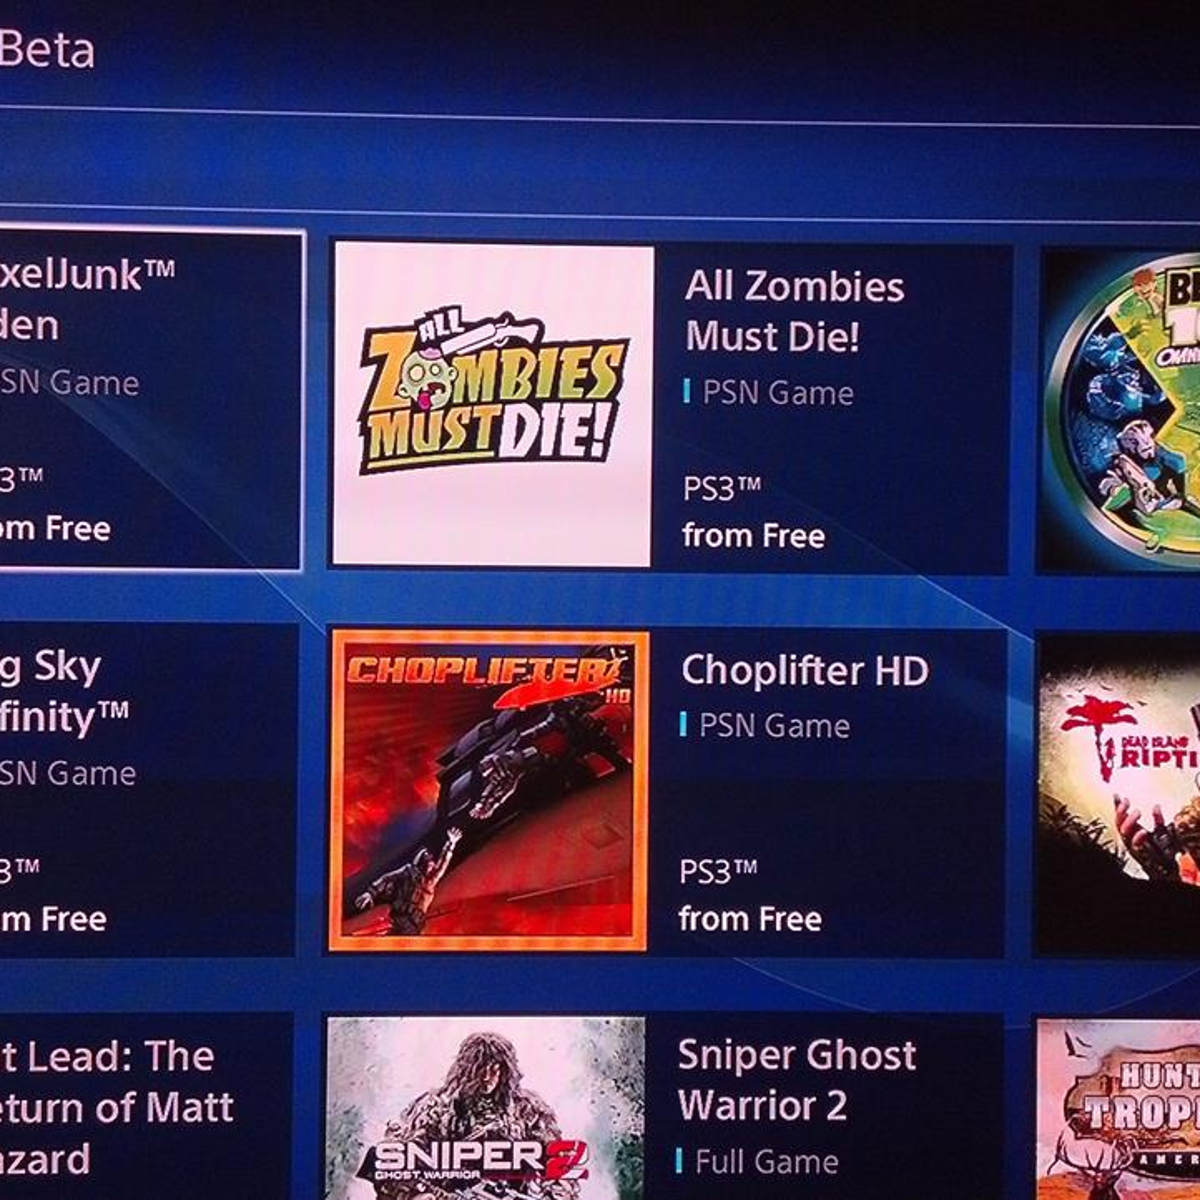 PlayStation Now beta gets six new games, but those high prices remain